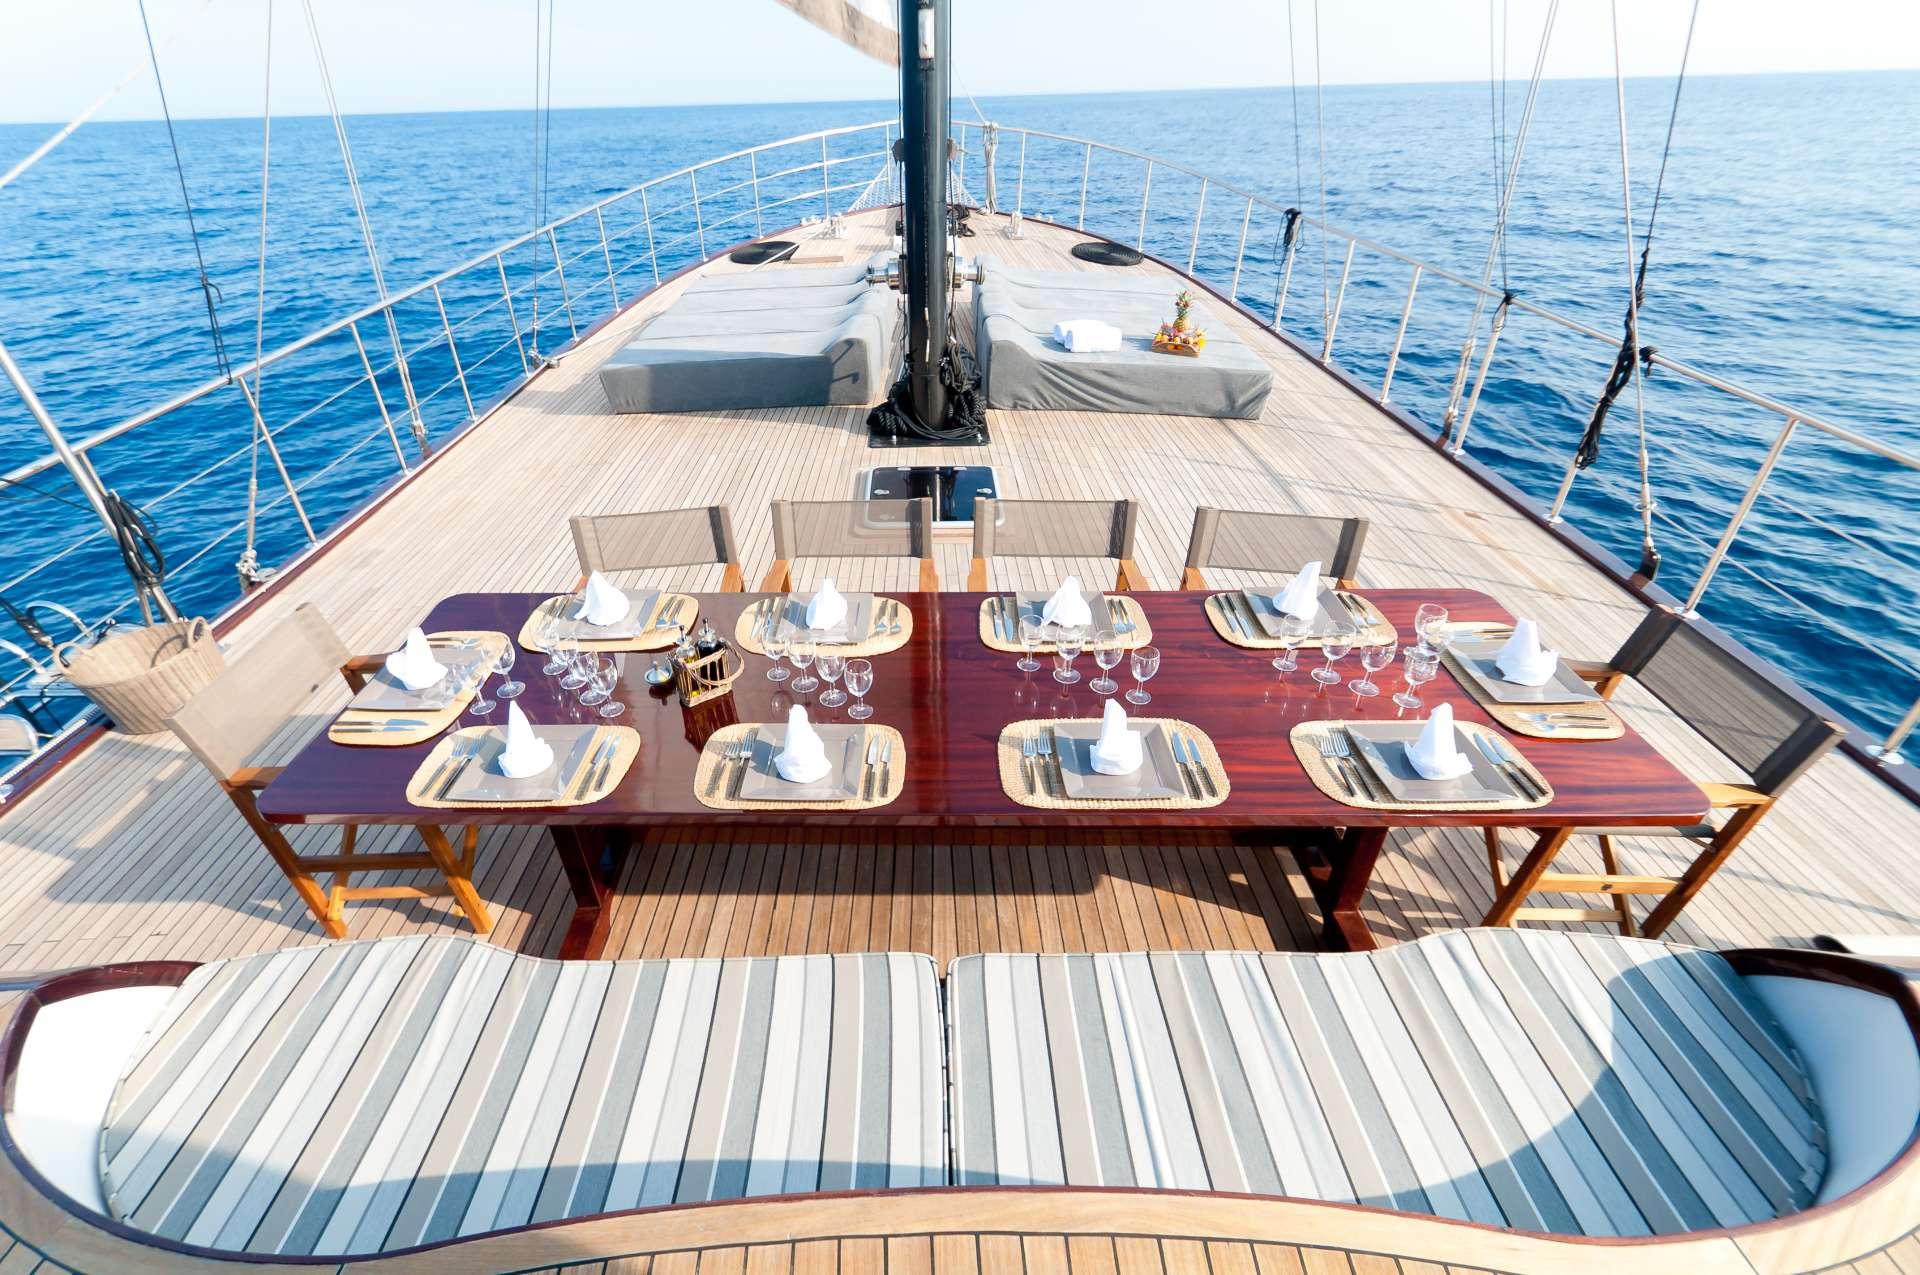 Vita Dolce Gulet for Family Cruise & Corporate Event Front Deck - High Point Yachting